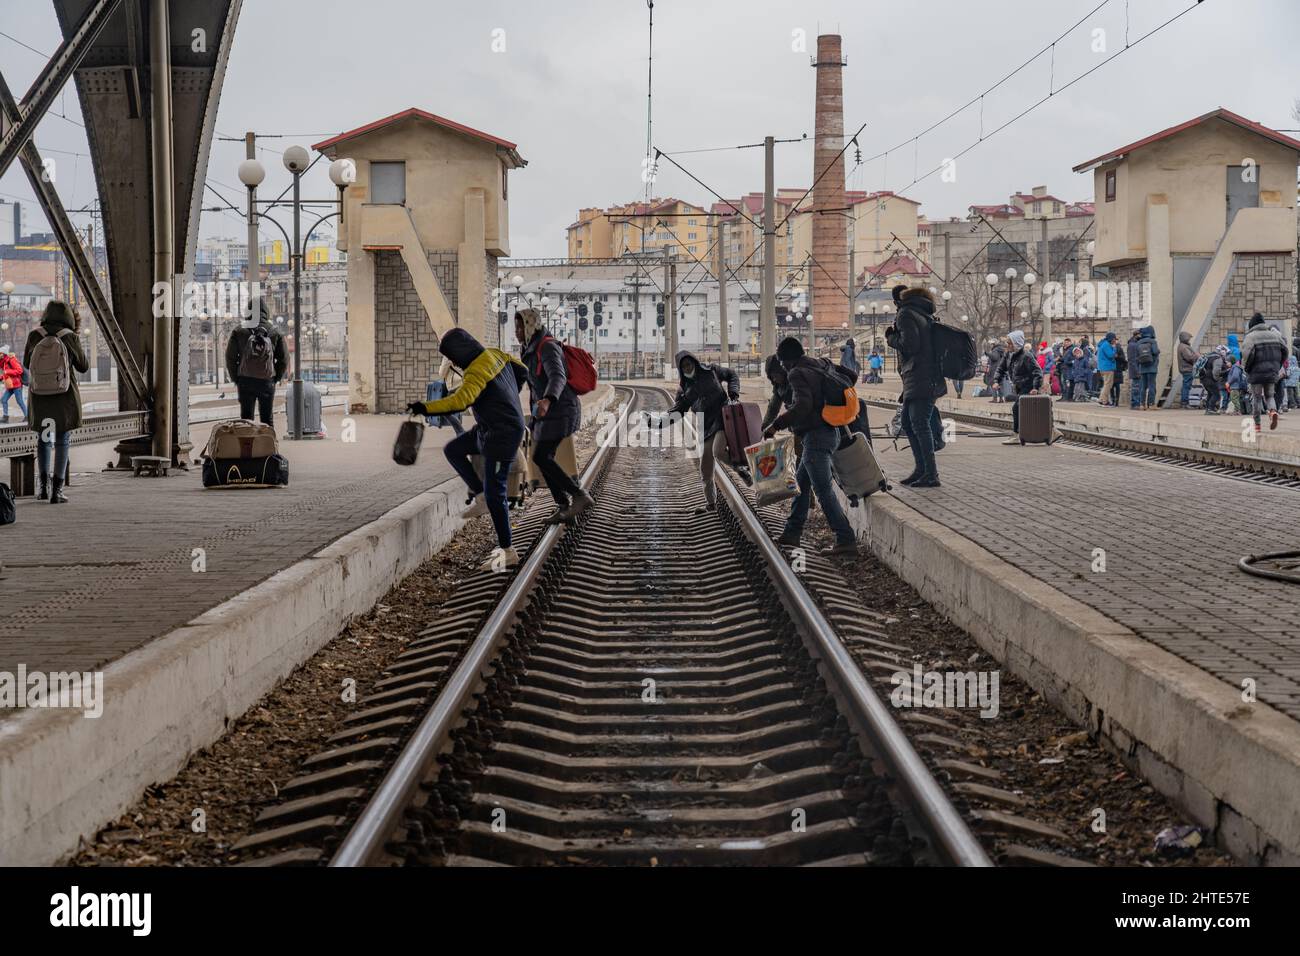 27th February 2022. Lviv Train Station, Ukraine. A group of Nigerian refugees move between platforms hoping to catch a train as desperation grows at Ukraine border as more than half a million refugees flee war - Copyright: Bel Trew/The Credit: Independent/Alamy Live News Stock Photo